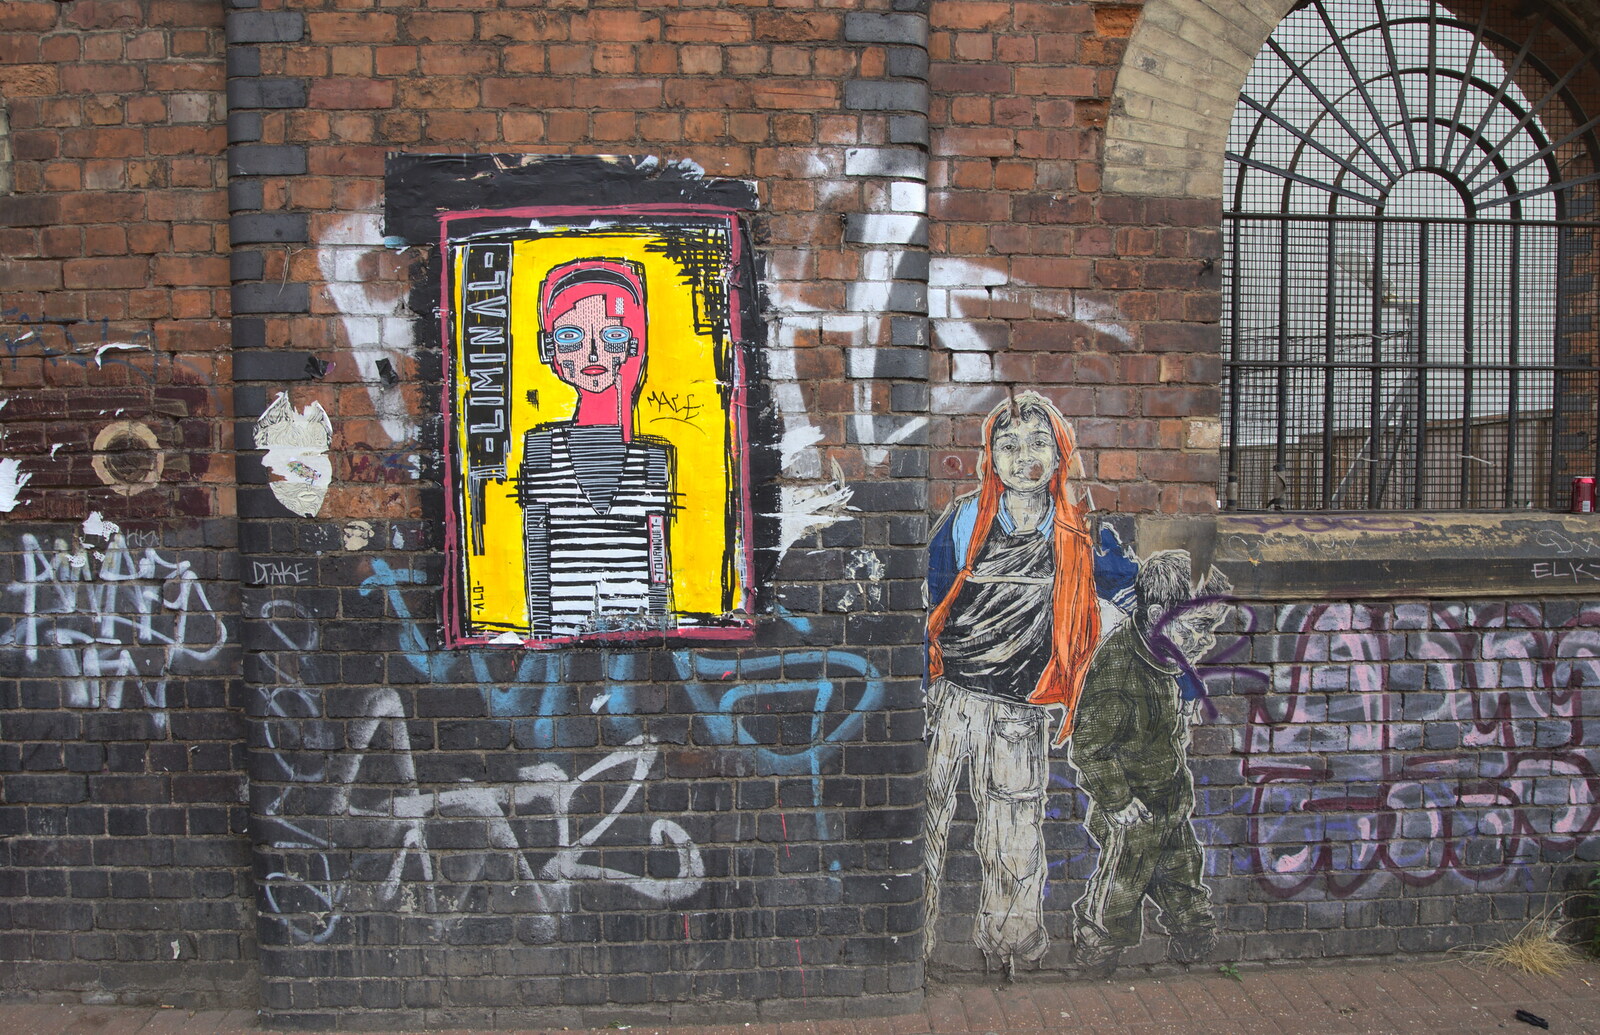 A funky painting entitled 'Liminal' from Spitalfields and Brick Lane Street Art, Whitechapel, London - 10th August 2013